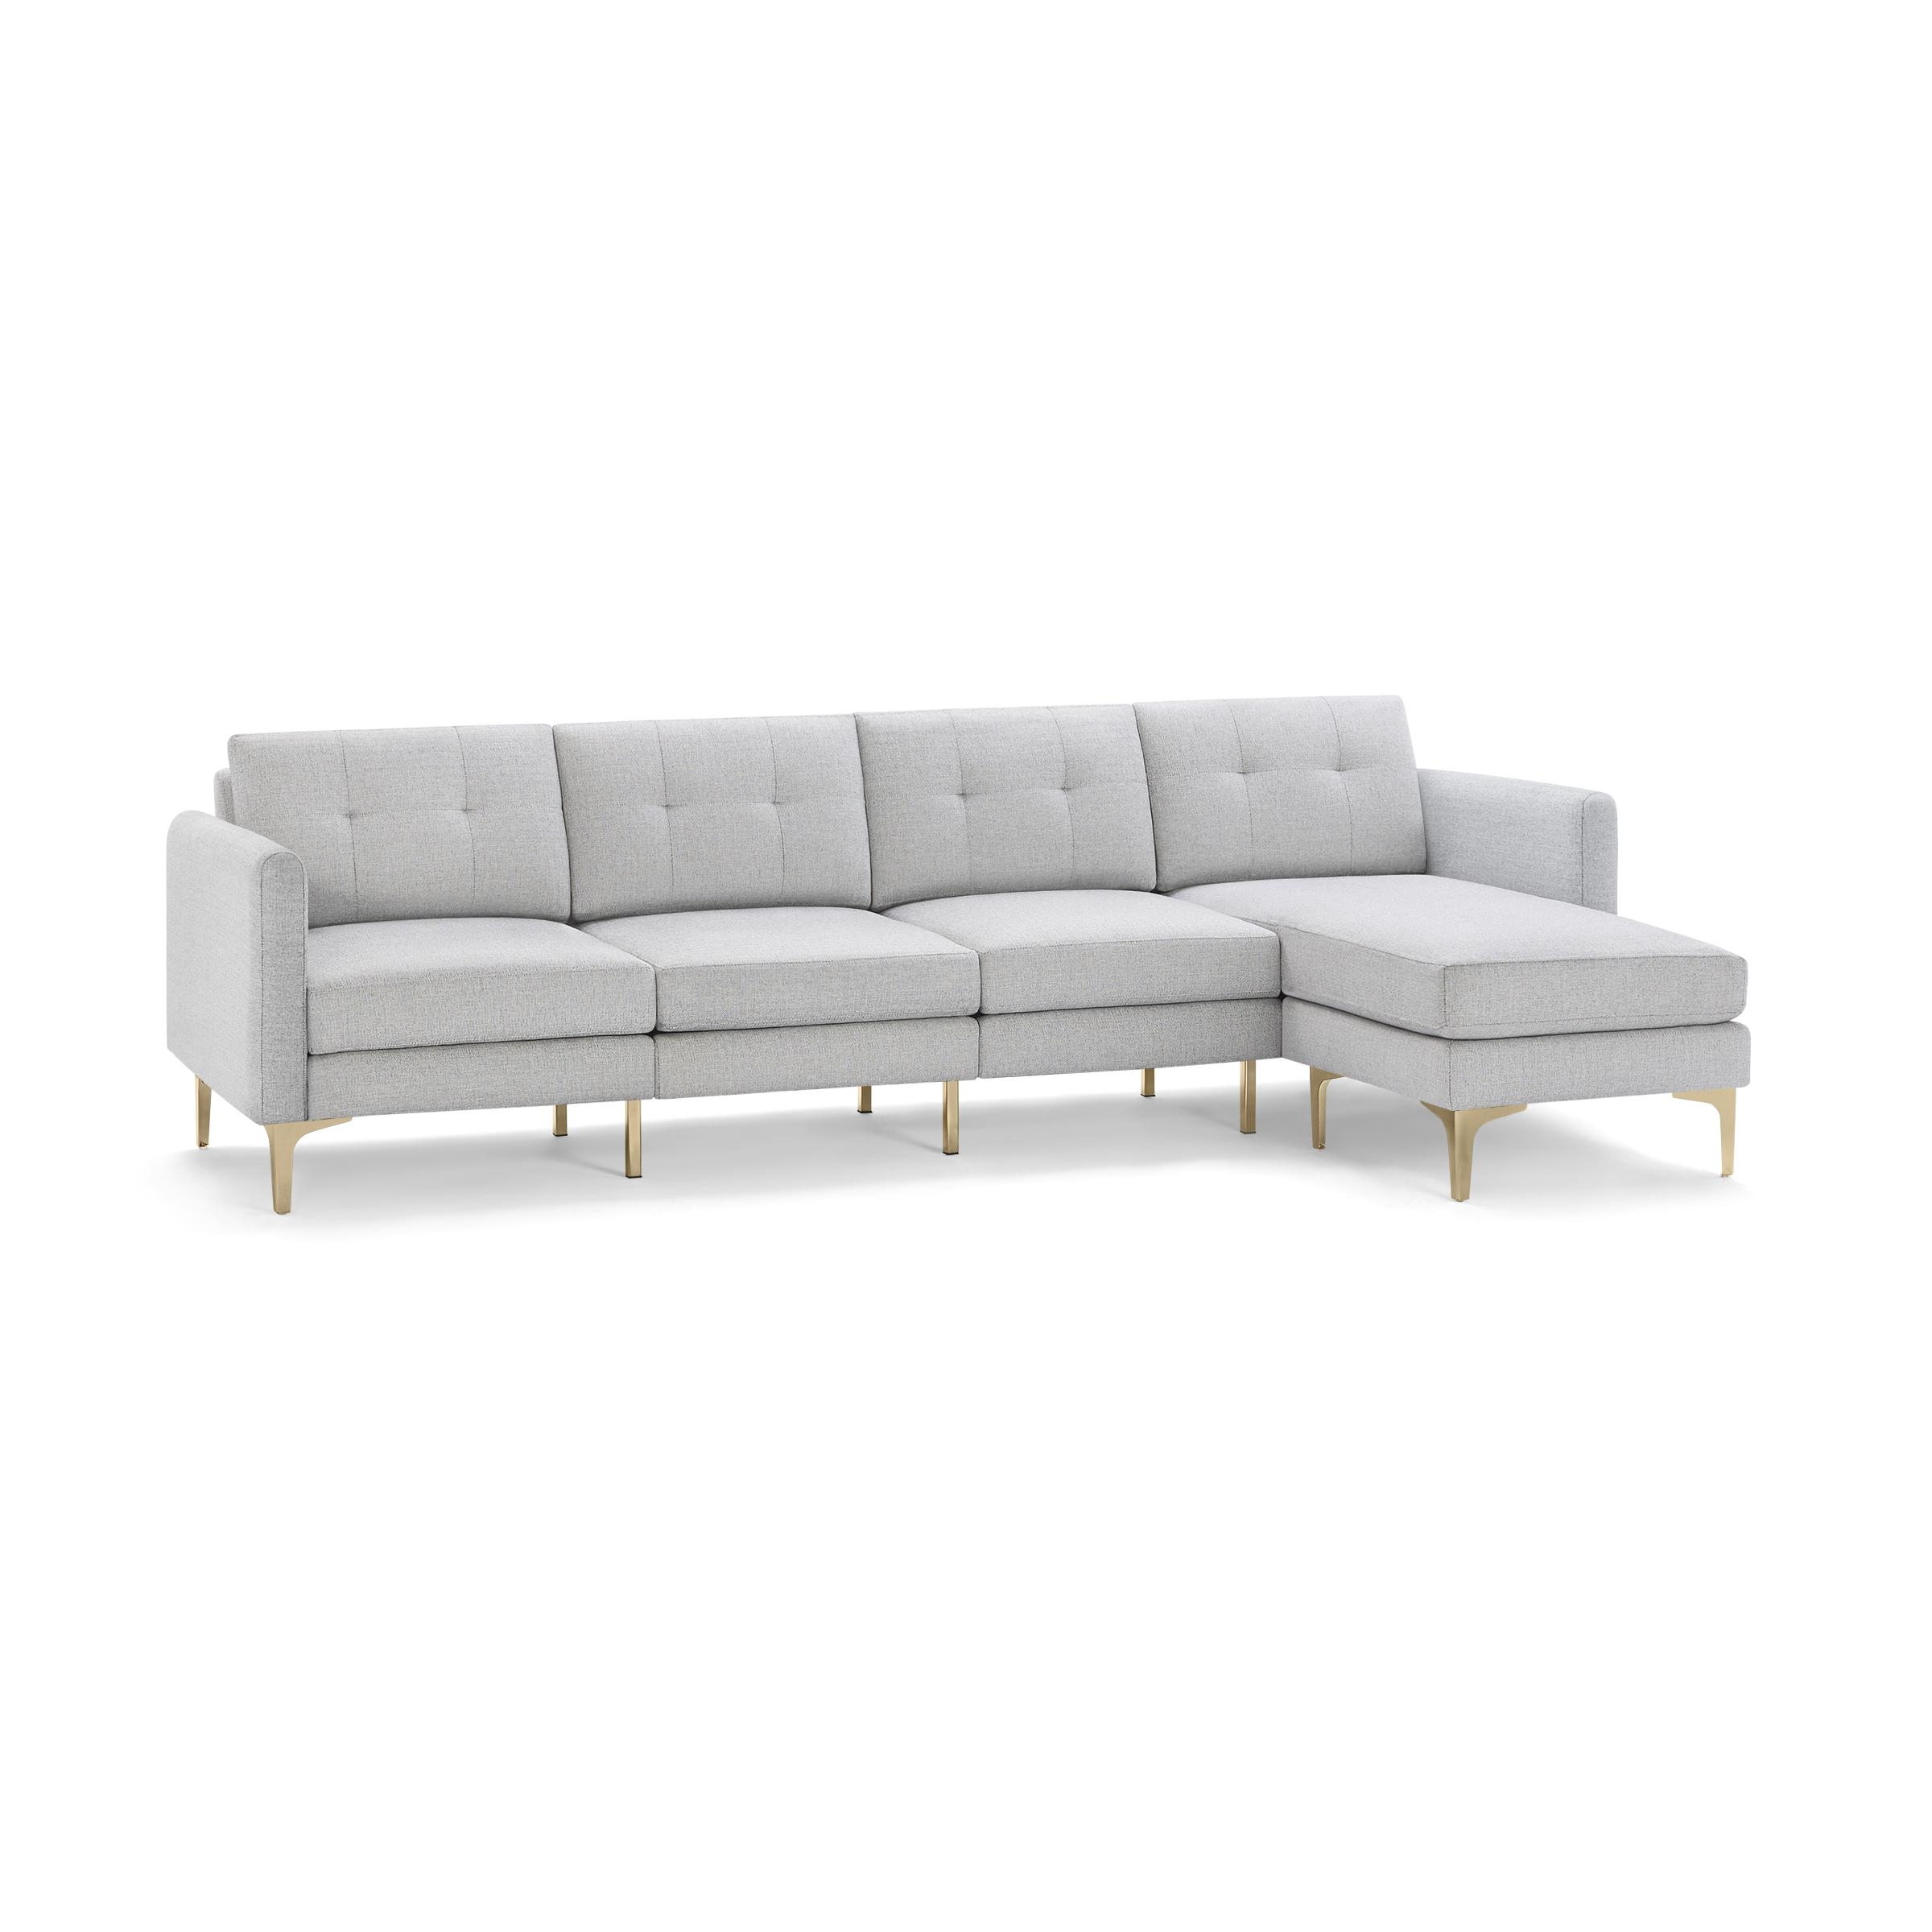 The Arch Nomad King Sectional Sofa in Crushed Gravel - Image 1